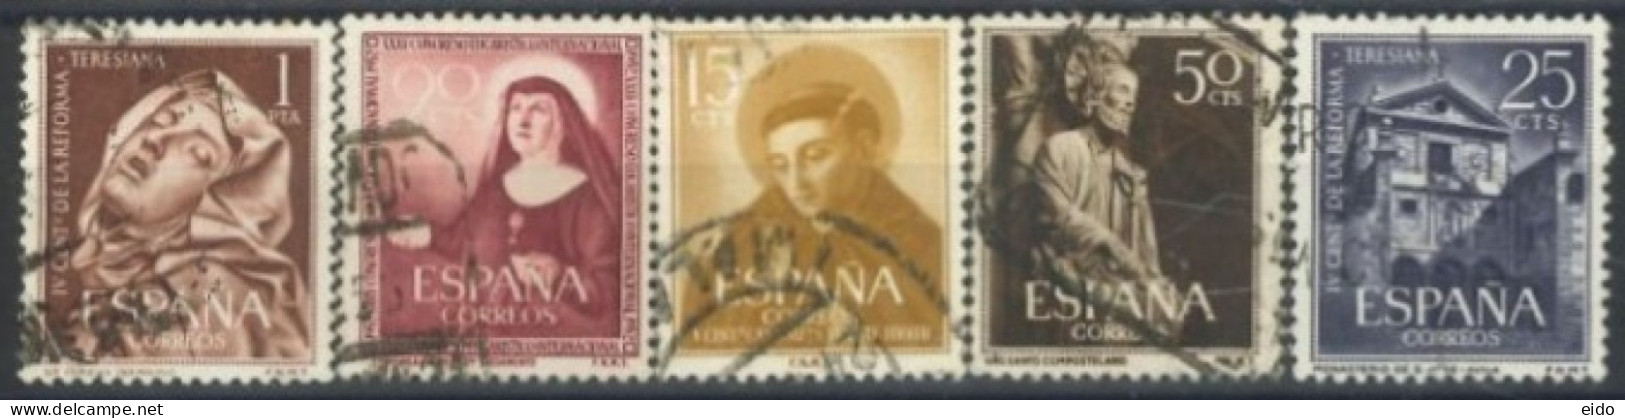 SPAIN, 1952/62, STAMPS SET OF 5, USED. - Used Stamps